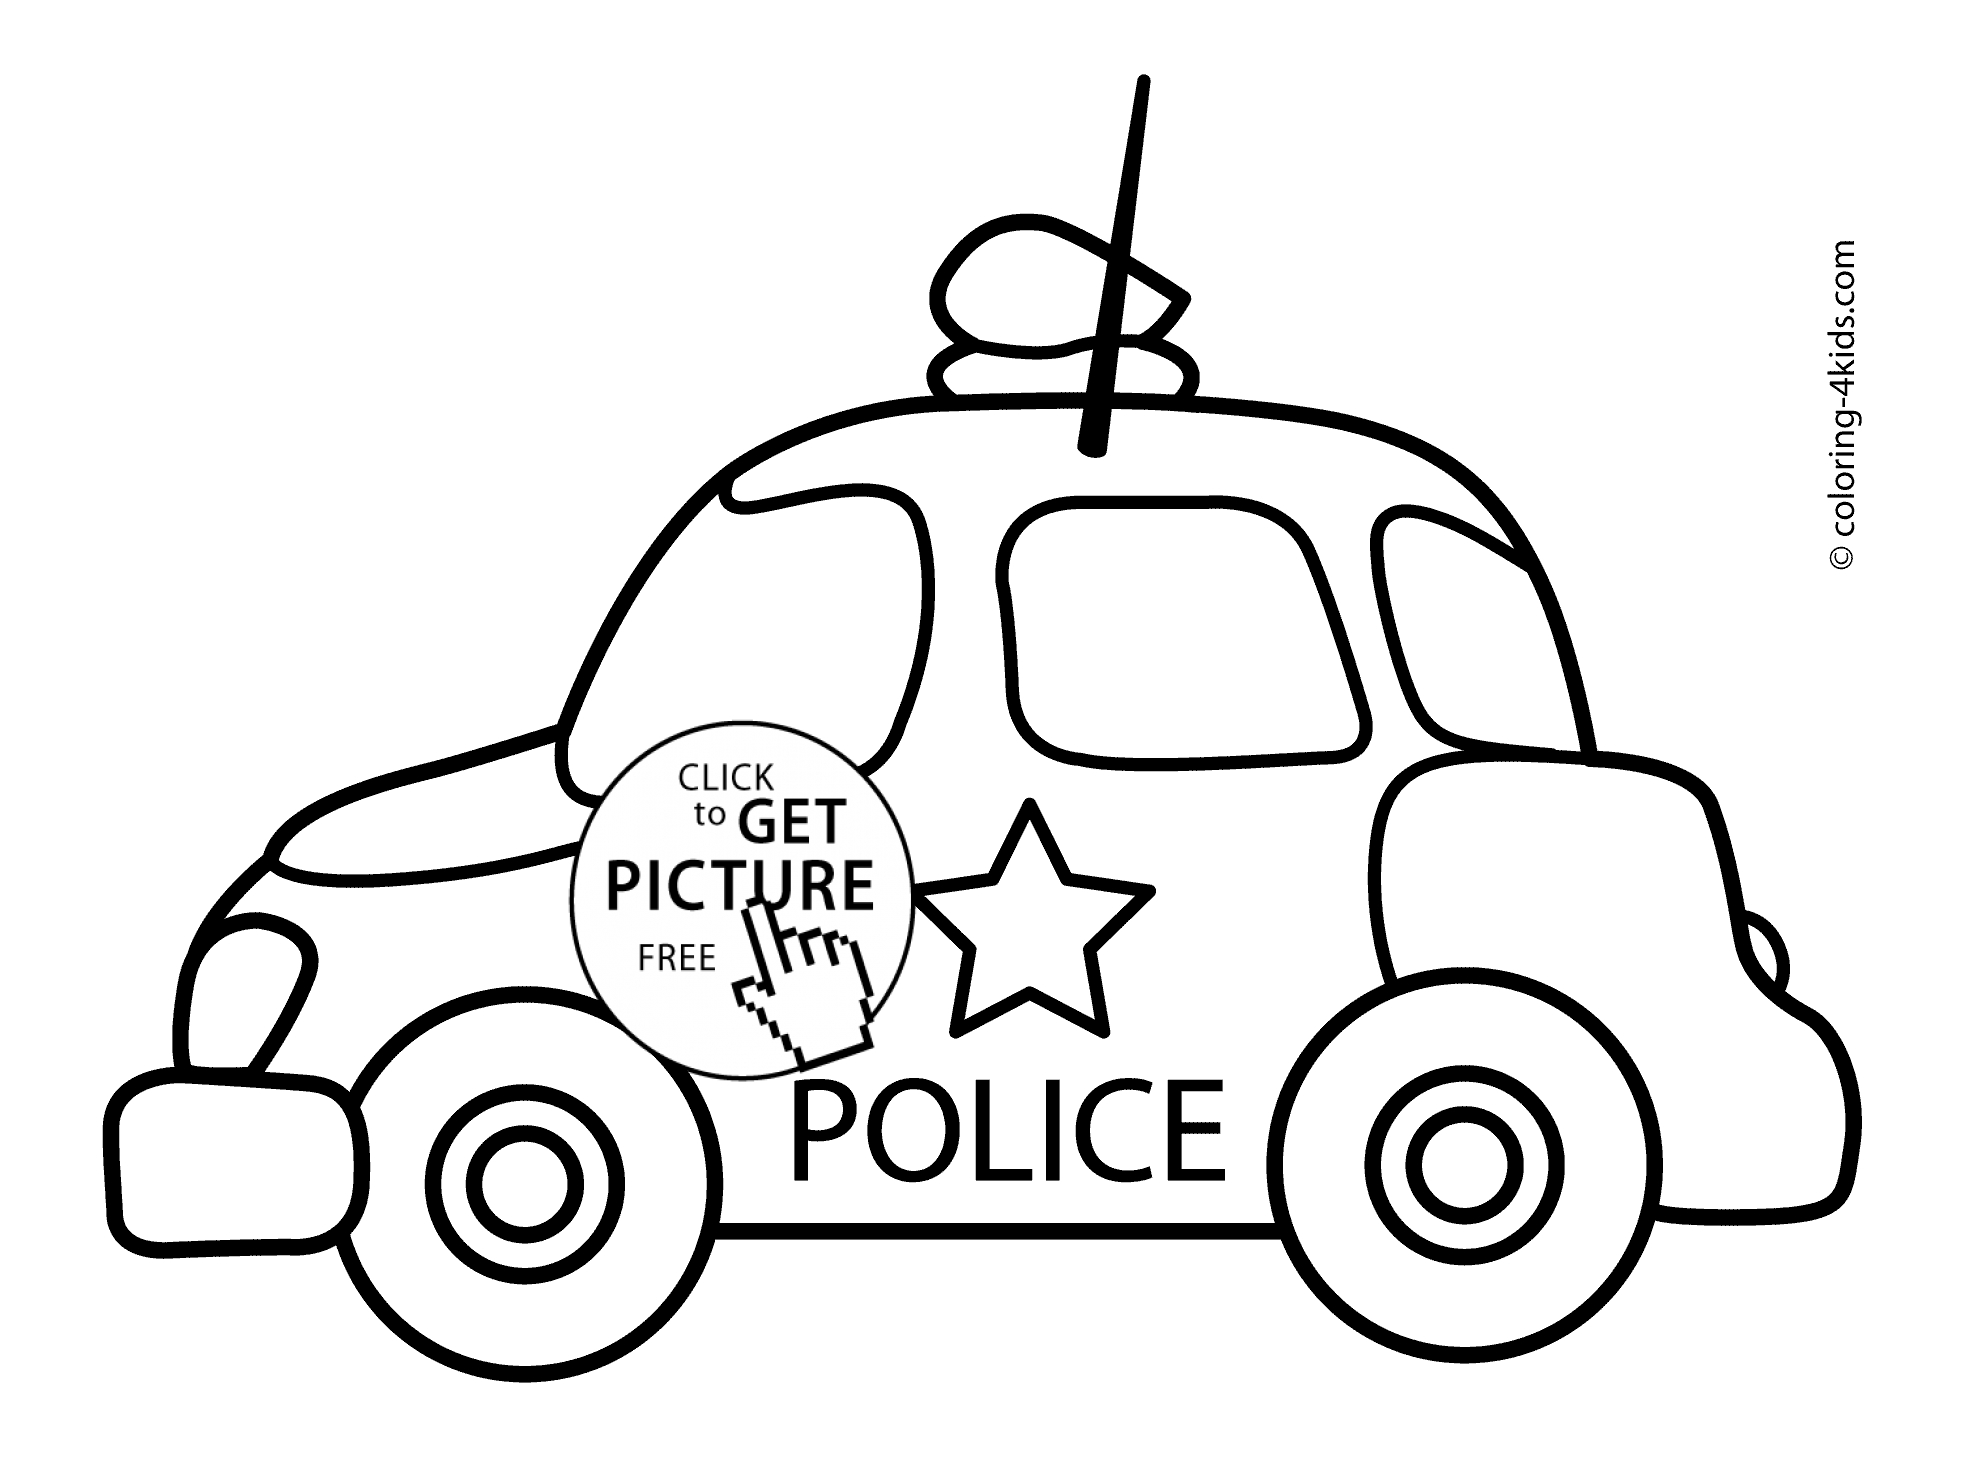 Printable Coloring Pages Cars Printable Coloring Pages For Kids Cars With Police Car